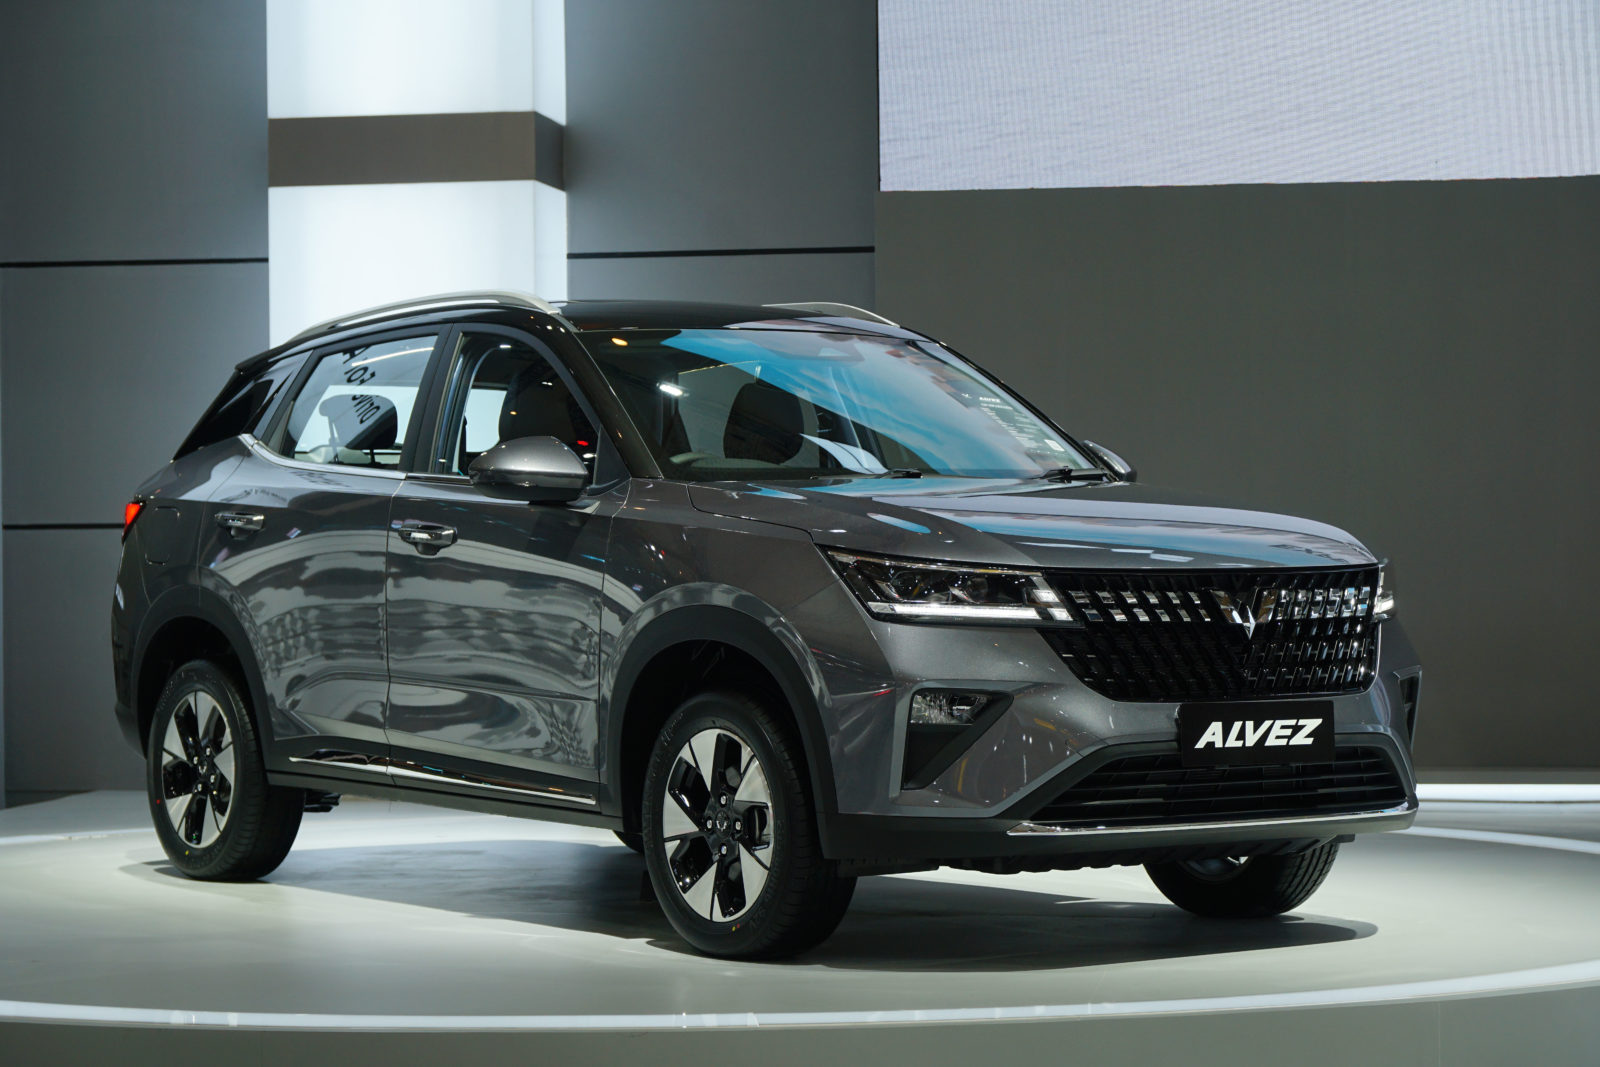 Image Wuling Alvez, A Compact SUV with Various Modern Innovations